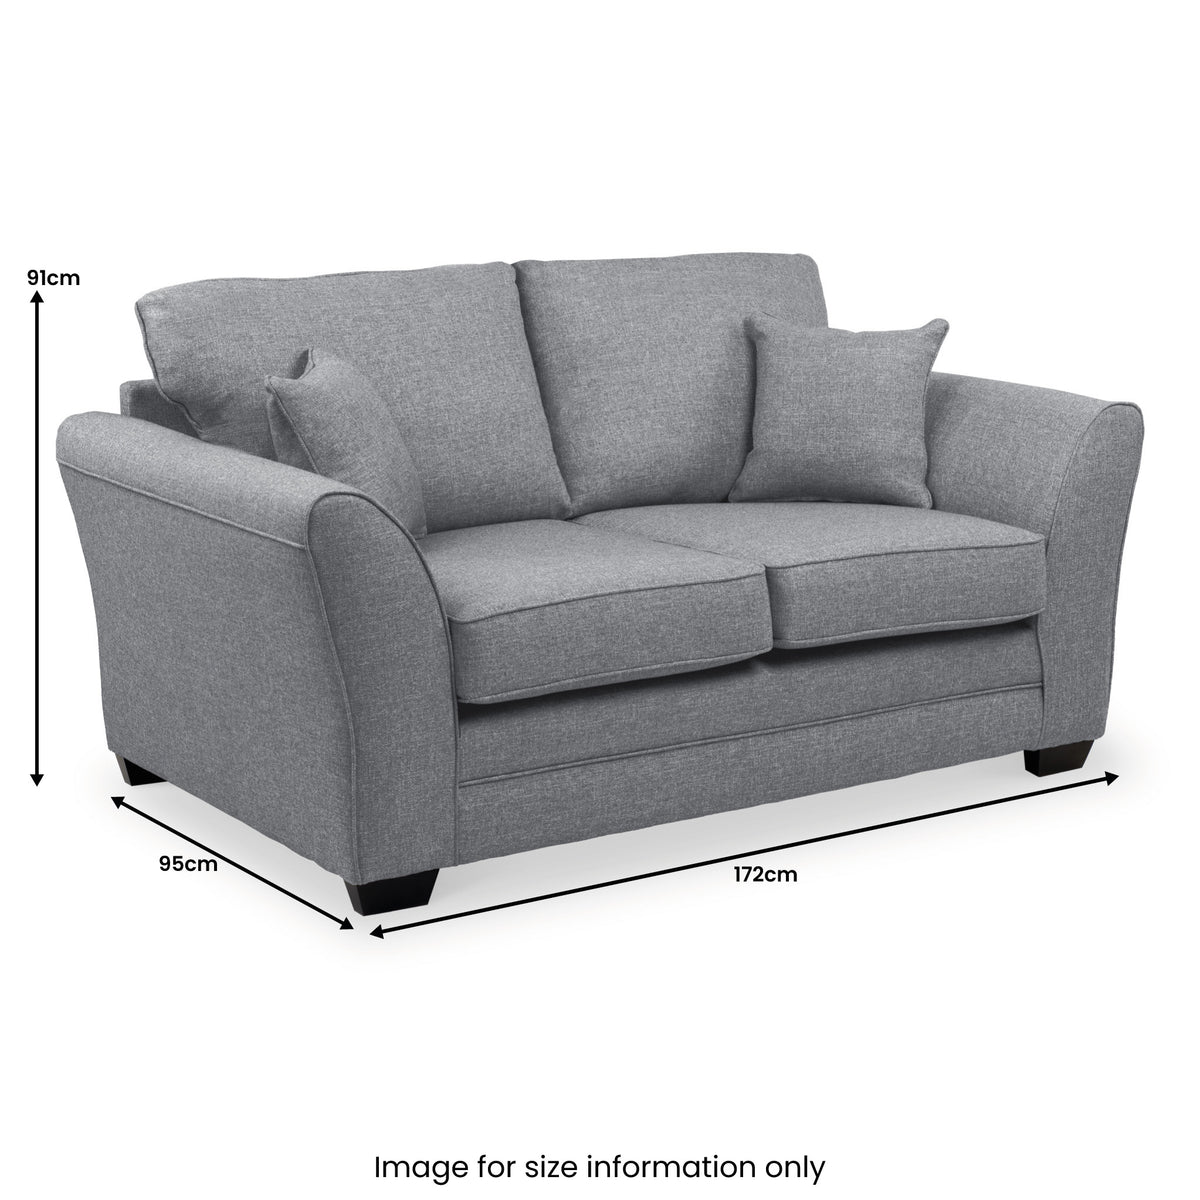 St Ives 2 Seater Sofa in Charcoal by Roseland Furniture